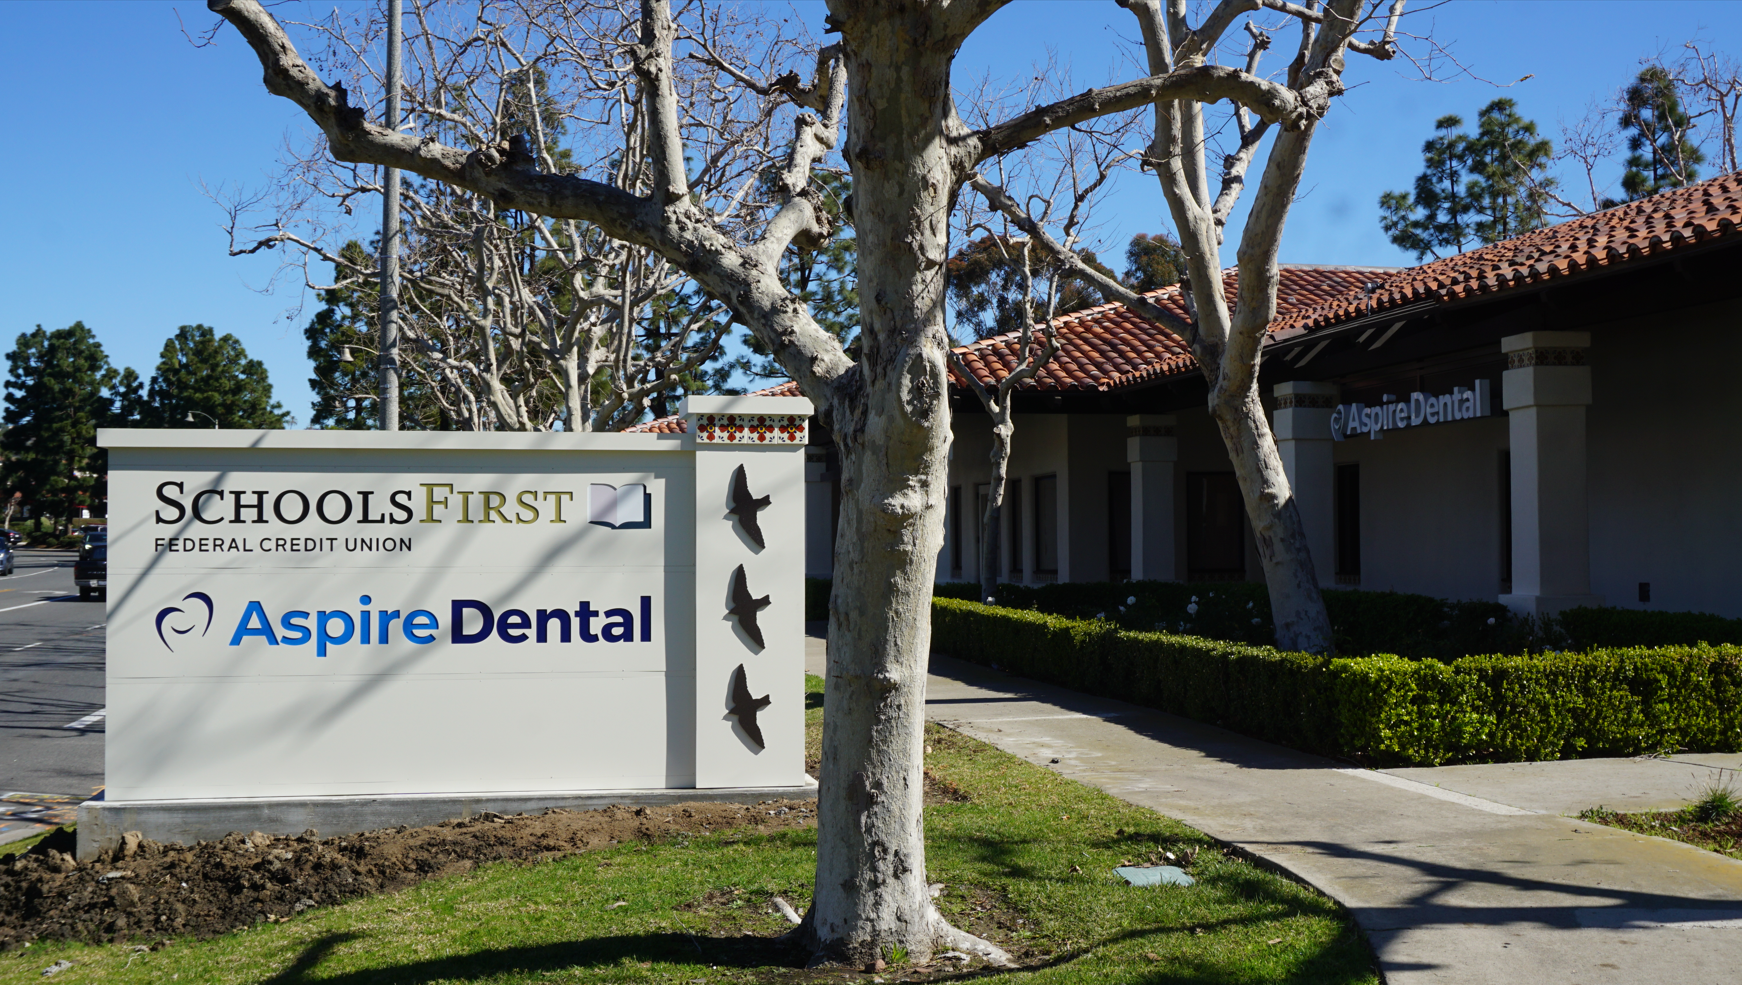 Make sure to look out for the Aspire Dental sign so you know you are in the right place. If you have trouble finding our office, call 949-538-4250 and our dental staff will assist you.